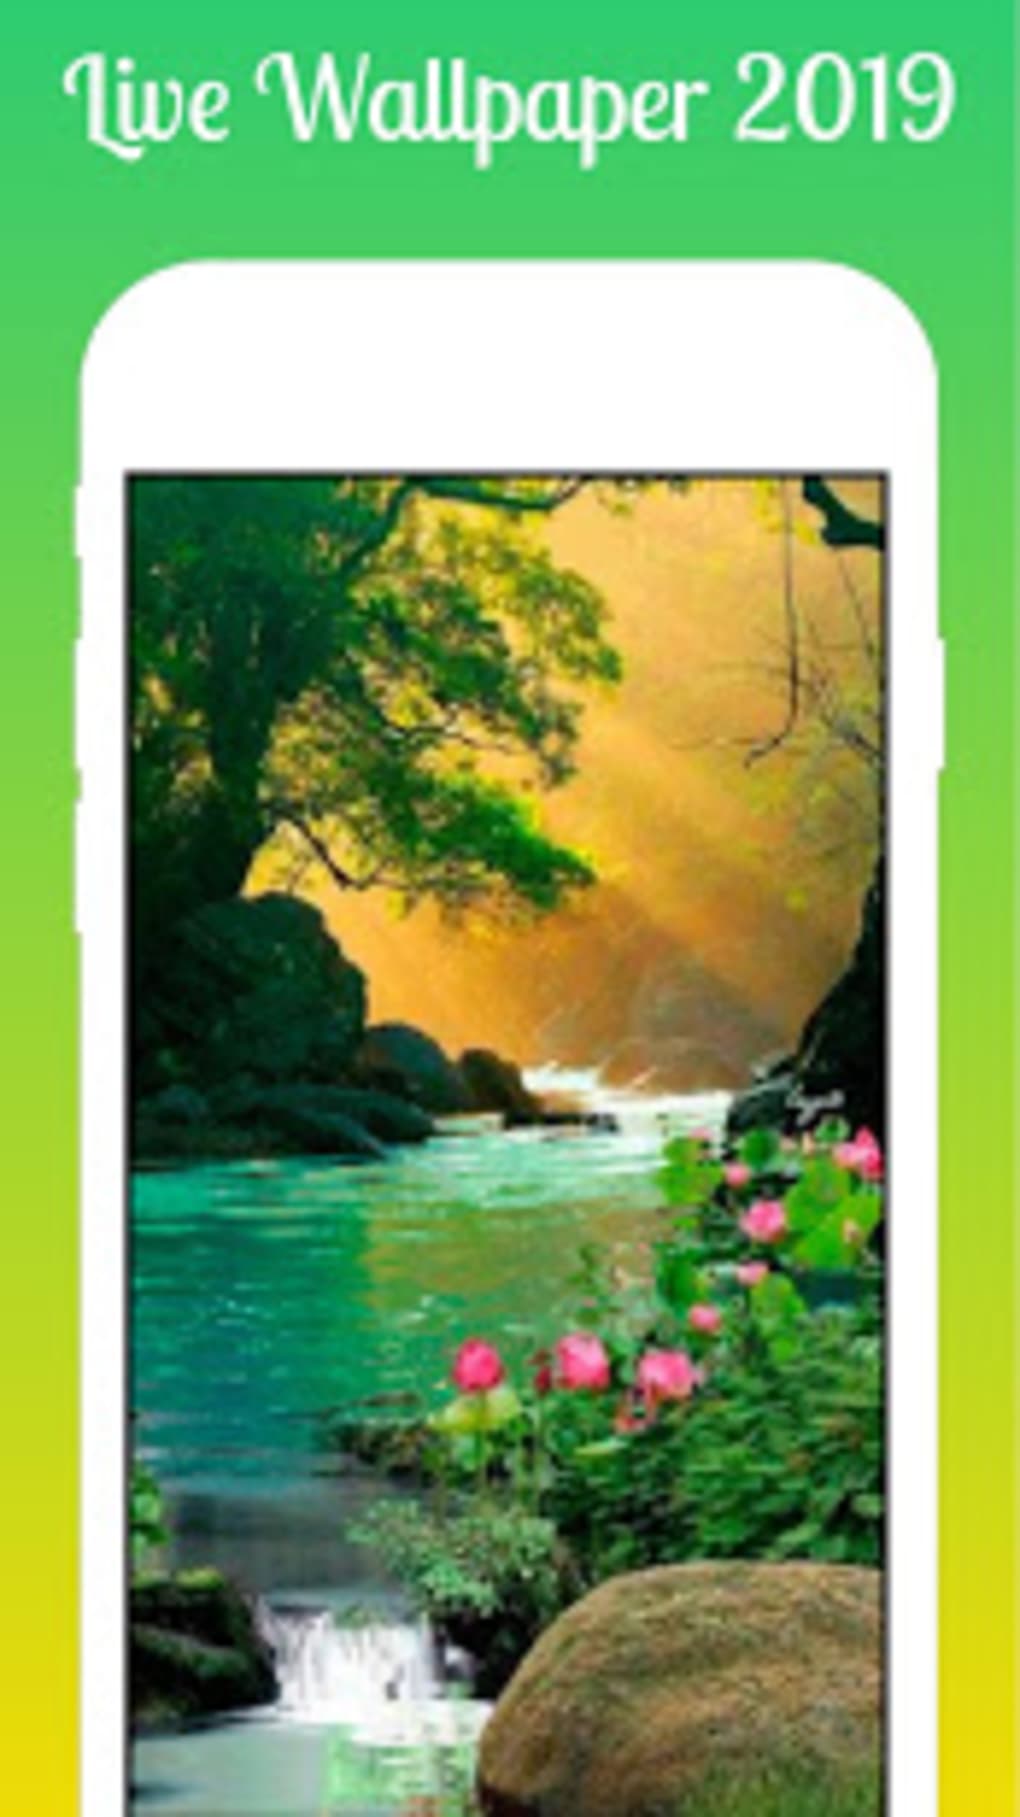 Spring Nature Live Wallpaper 2019 HD